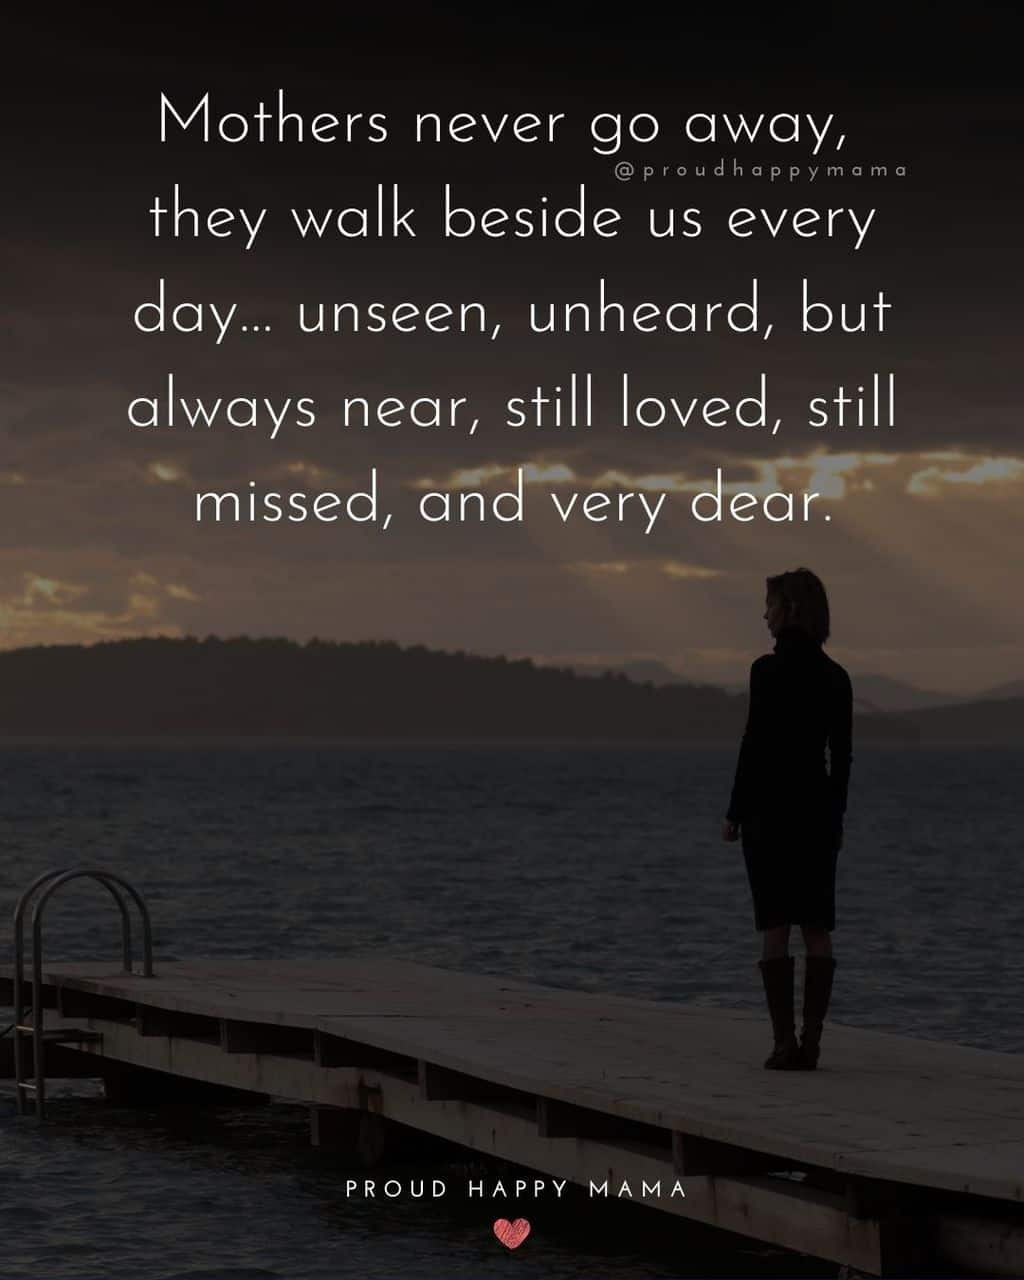 Woman standing on jetty looking out to the water with text overlay, ‘Mothers never go away, they walk beside us every day... unseen, unheard, but always near, still loved, still missed, and very dear.’